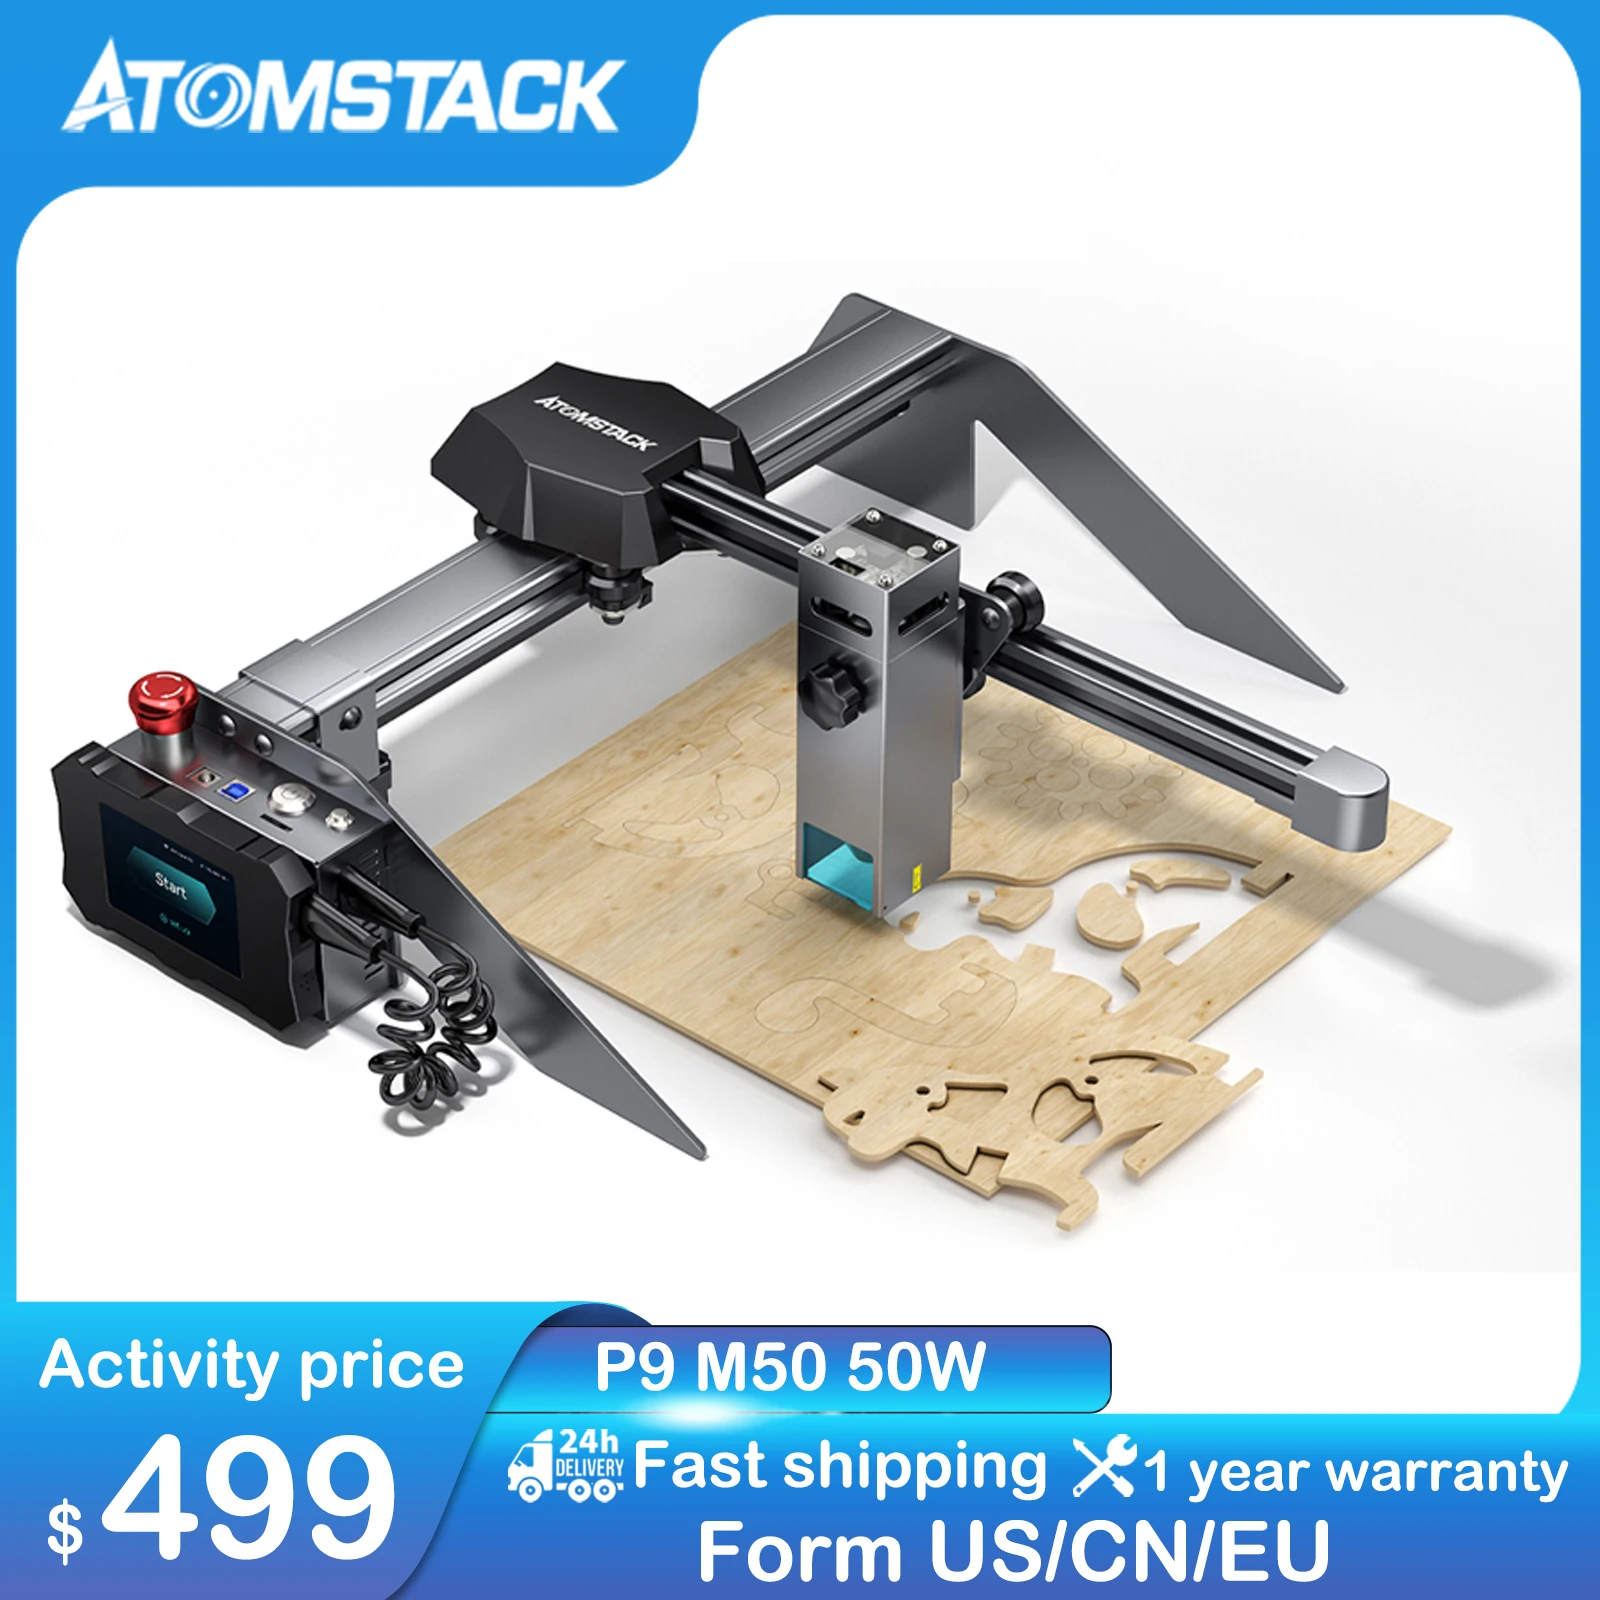 

ATOMSTACK Laser Engraver P9 50W Laser CNC Engraving Machine Eye Protection Fixed Focus 10W Compressed Spot Power DIY Laser Cutte